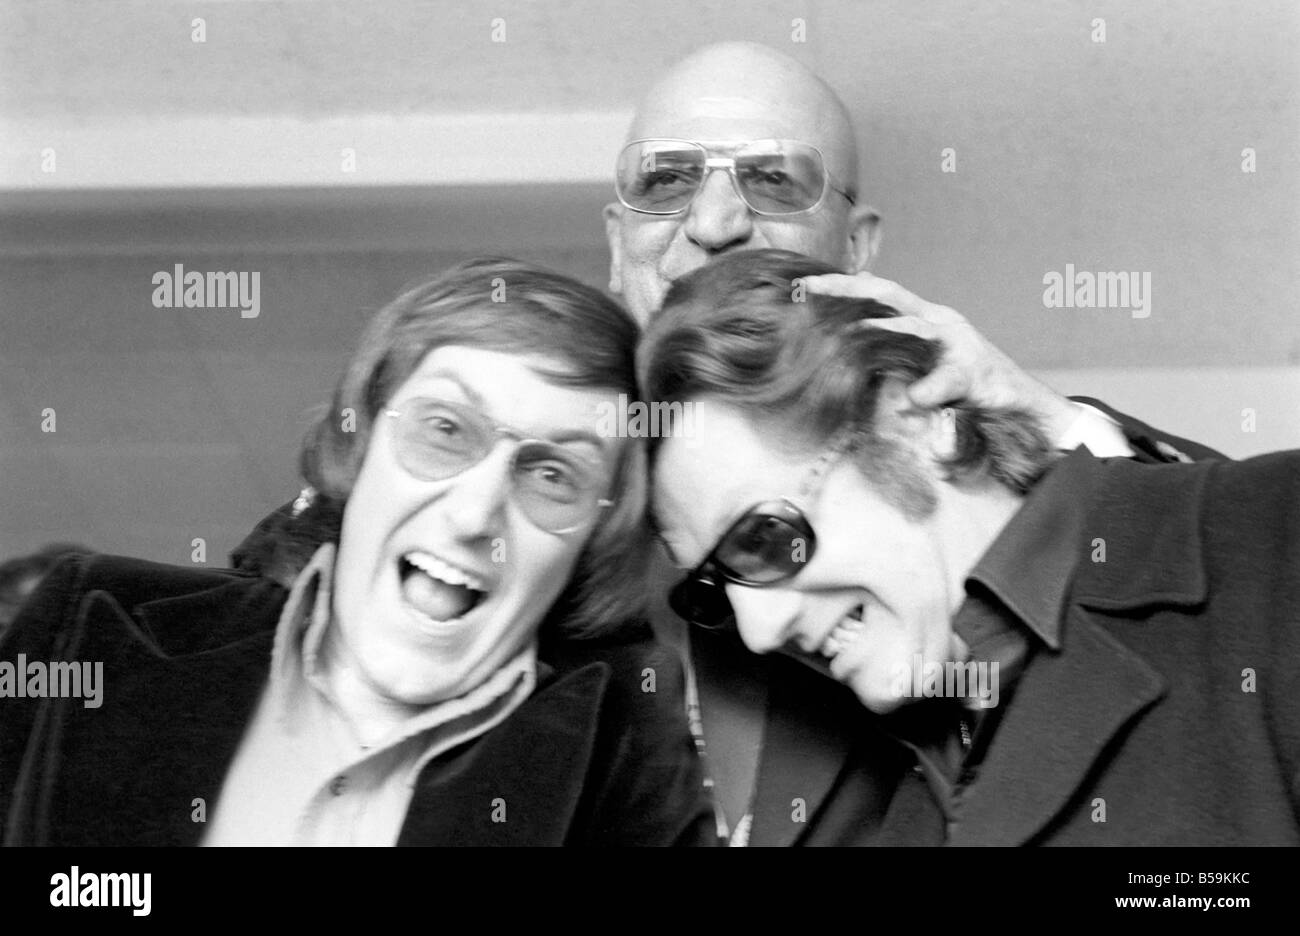 American actor Telly Savalas with Yin (left) and Yan, two pop singers who have made a record named IF sending up Telly's origina Stock Photo